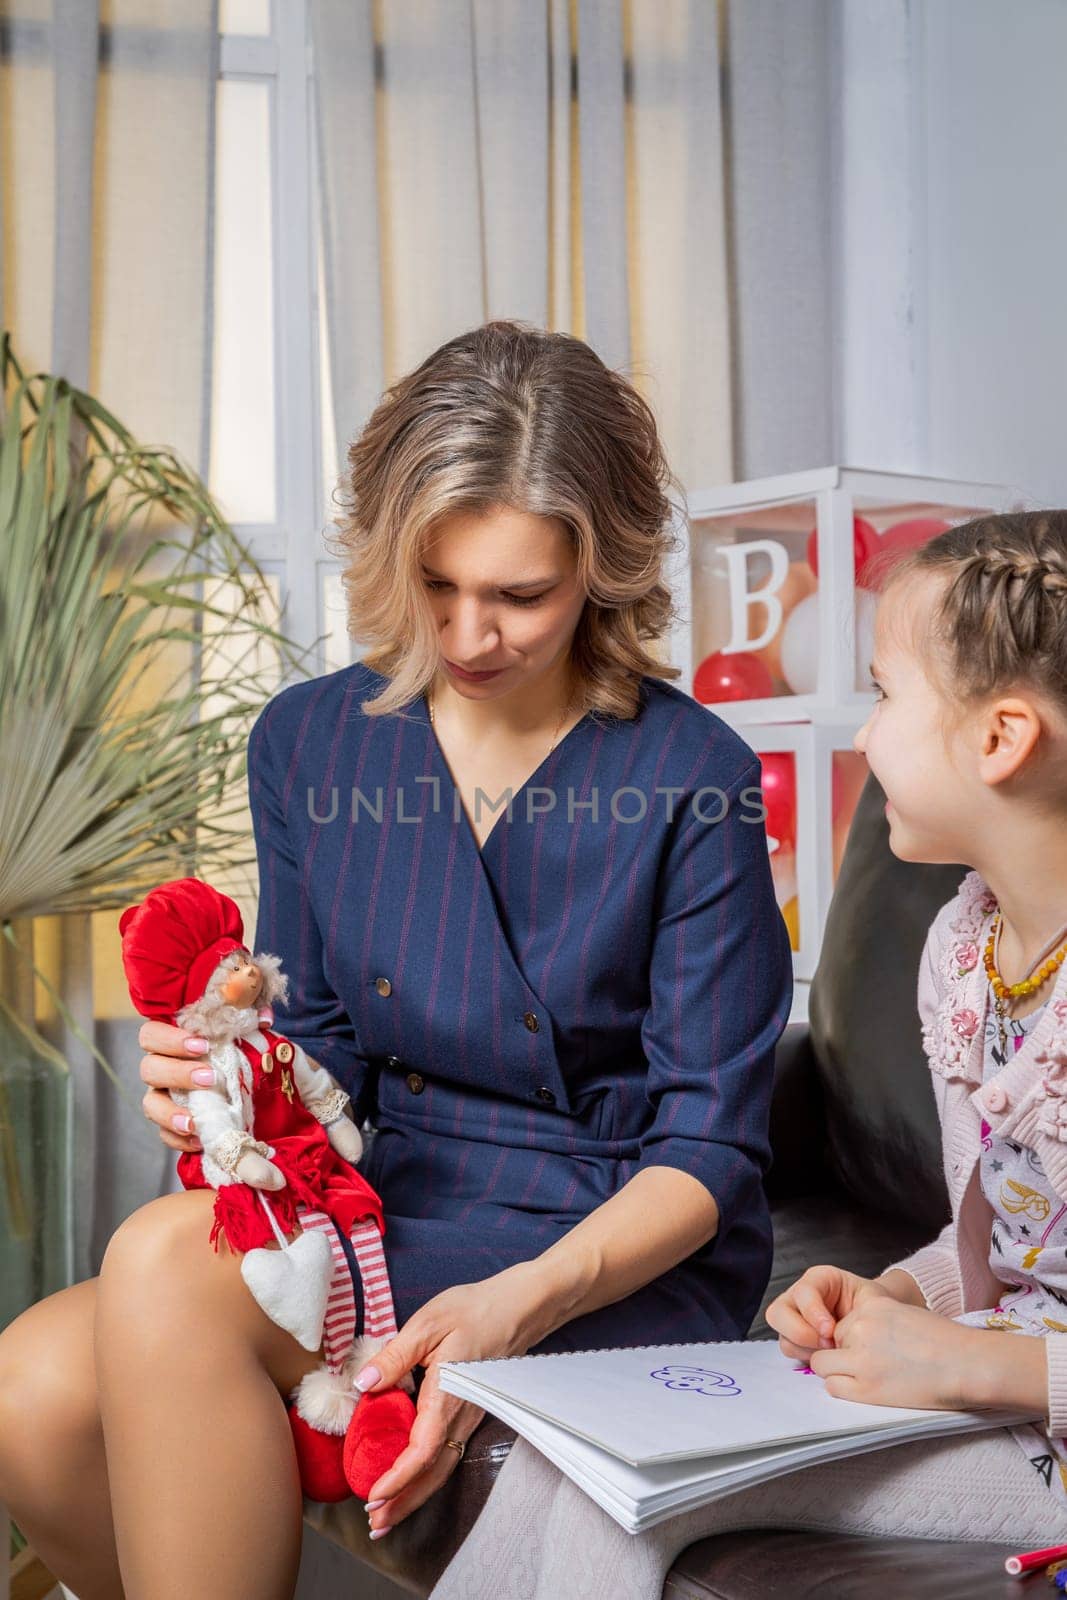 The girl psychologist plays a puppet character game with the child. by Yurich32